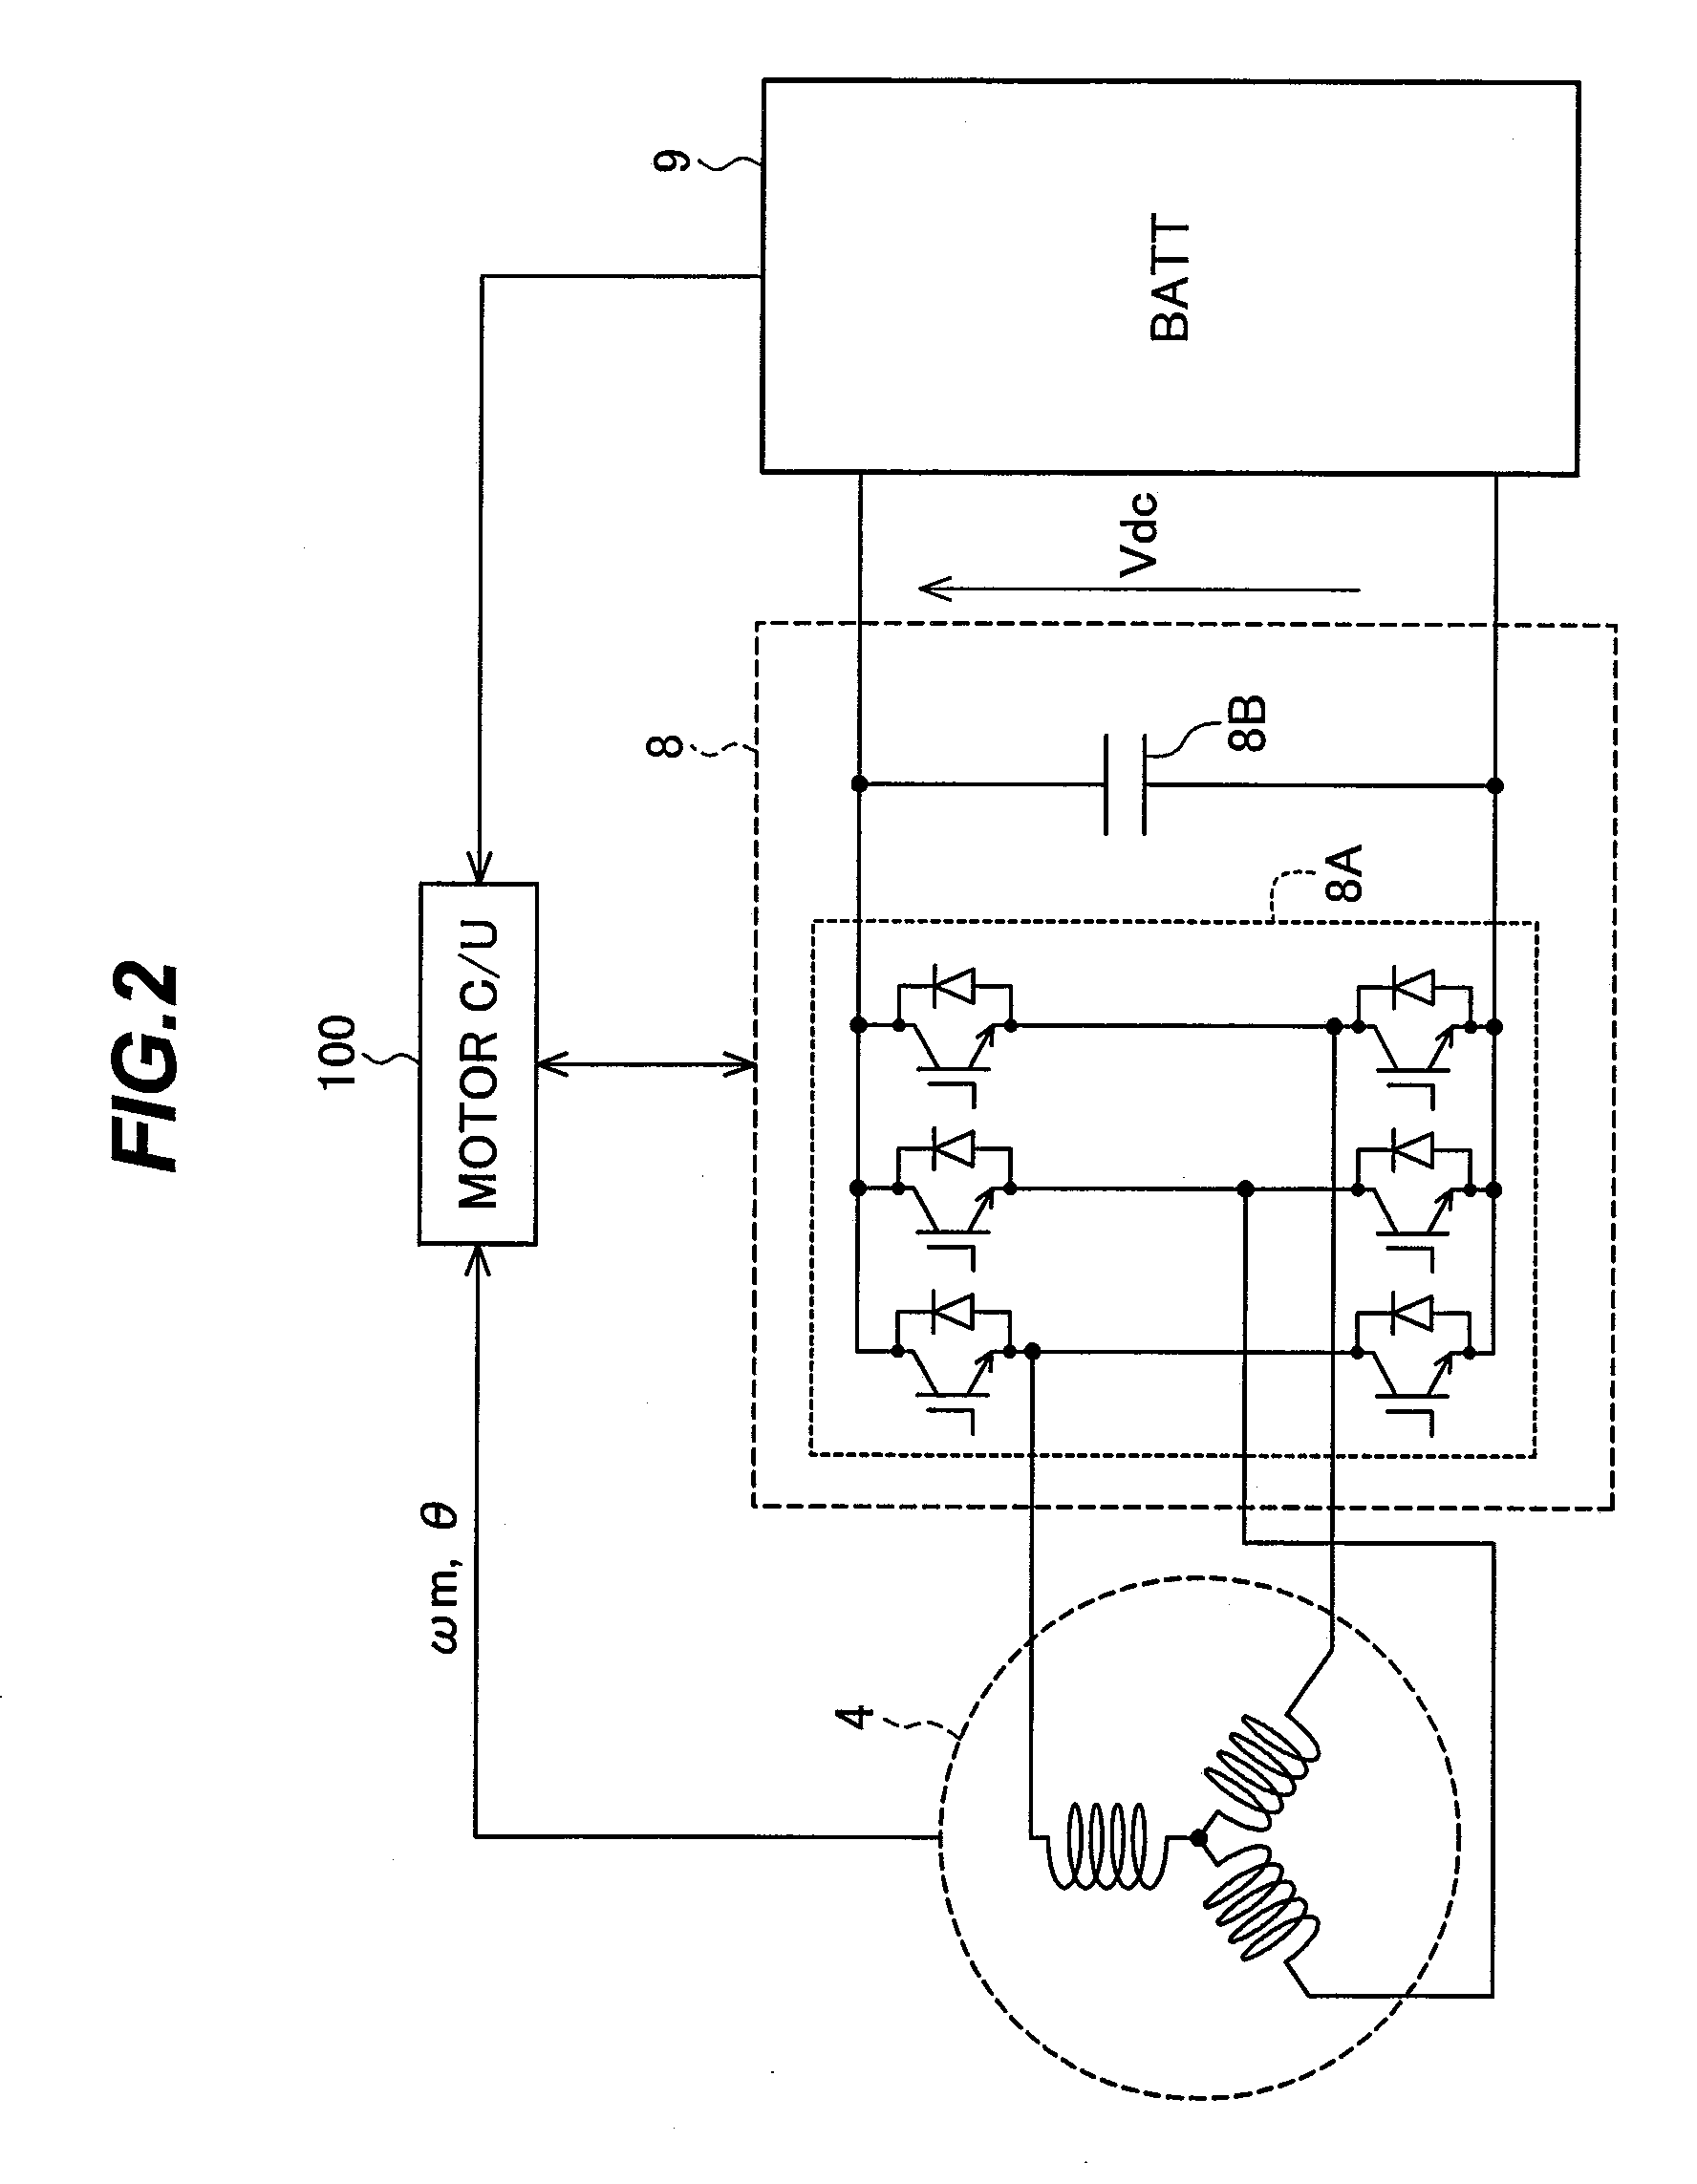 Motor Control Apparatus and Control Apparatus for hybrid Electric Vehicles